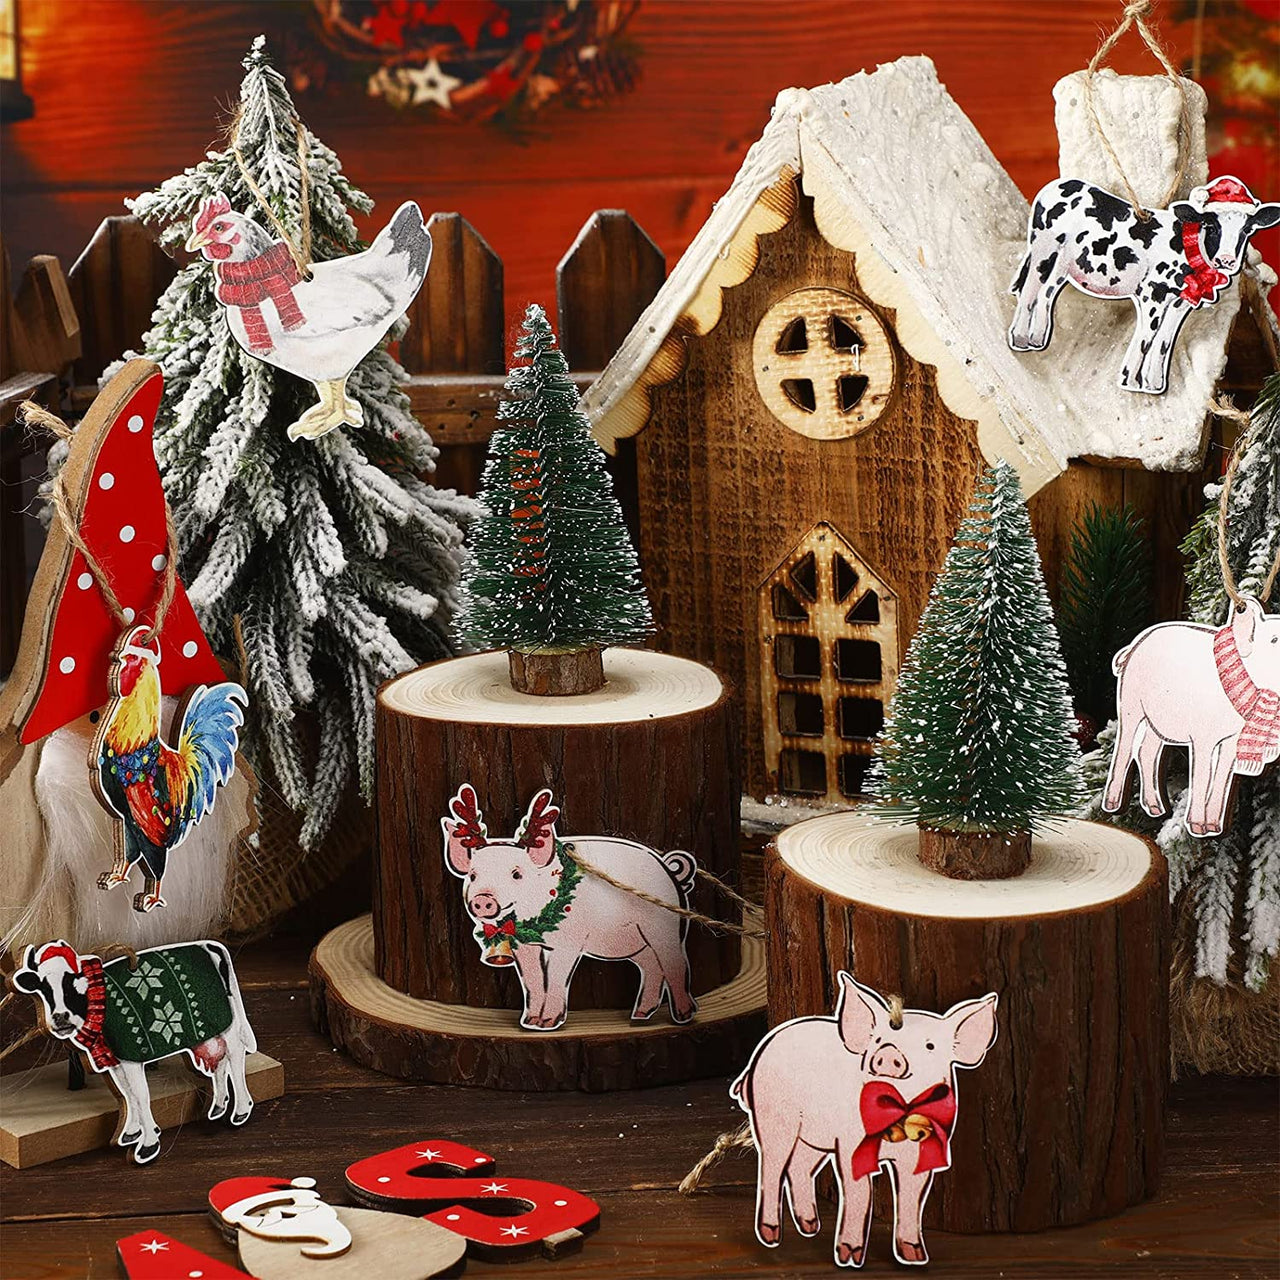 15 Pcs Christmas Ornaments Farm Animal Christmas Ornaments Wooden Farmhouse Theme Pig Cow Rooster Chicken Christmas Hanging Decorations for Christmas Tree Fireplace Home, 15 Styles